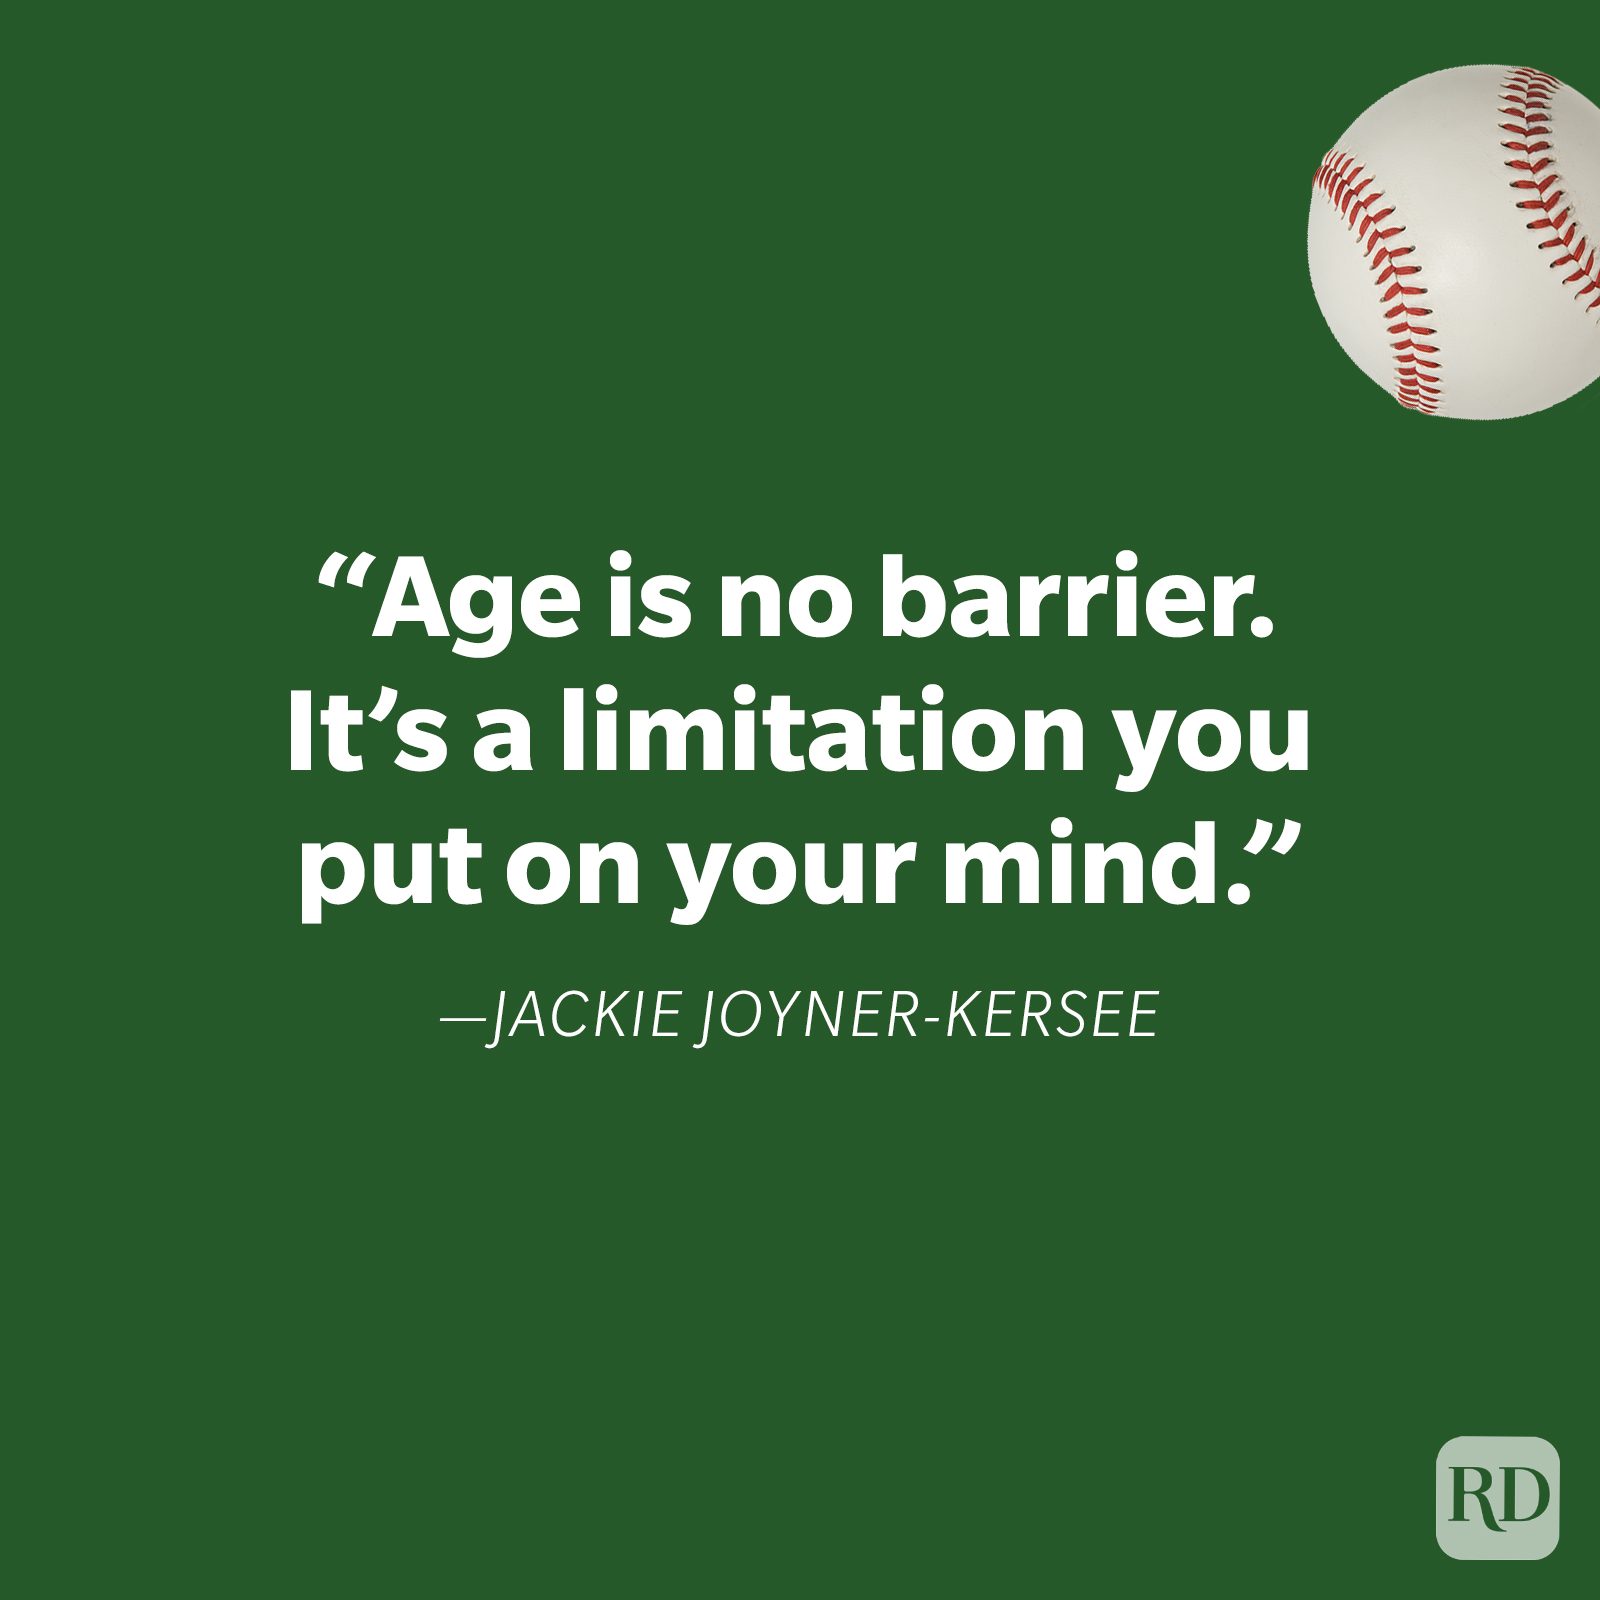 55 Most Famous Inspirational Sports Quotes of All-Time